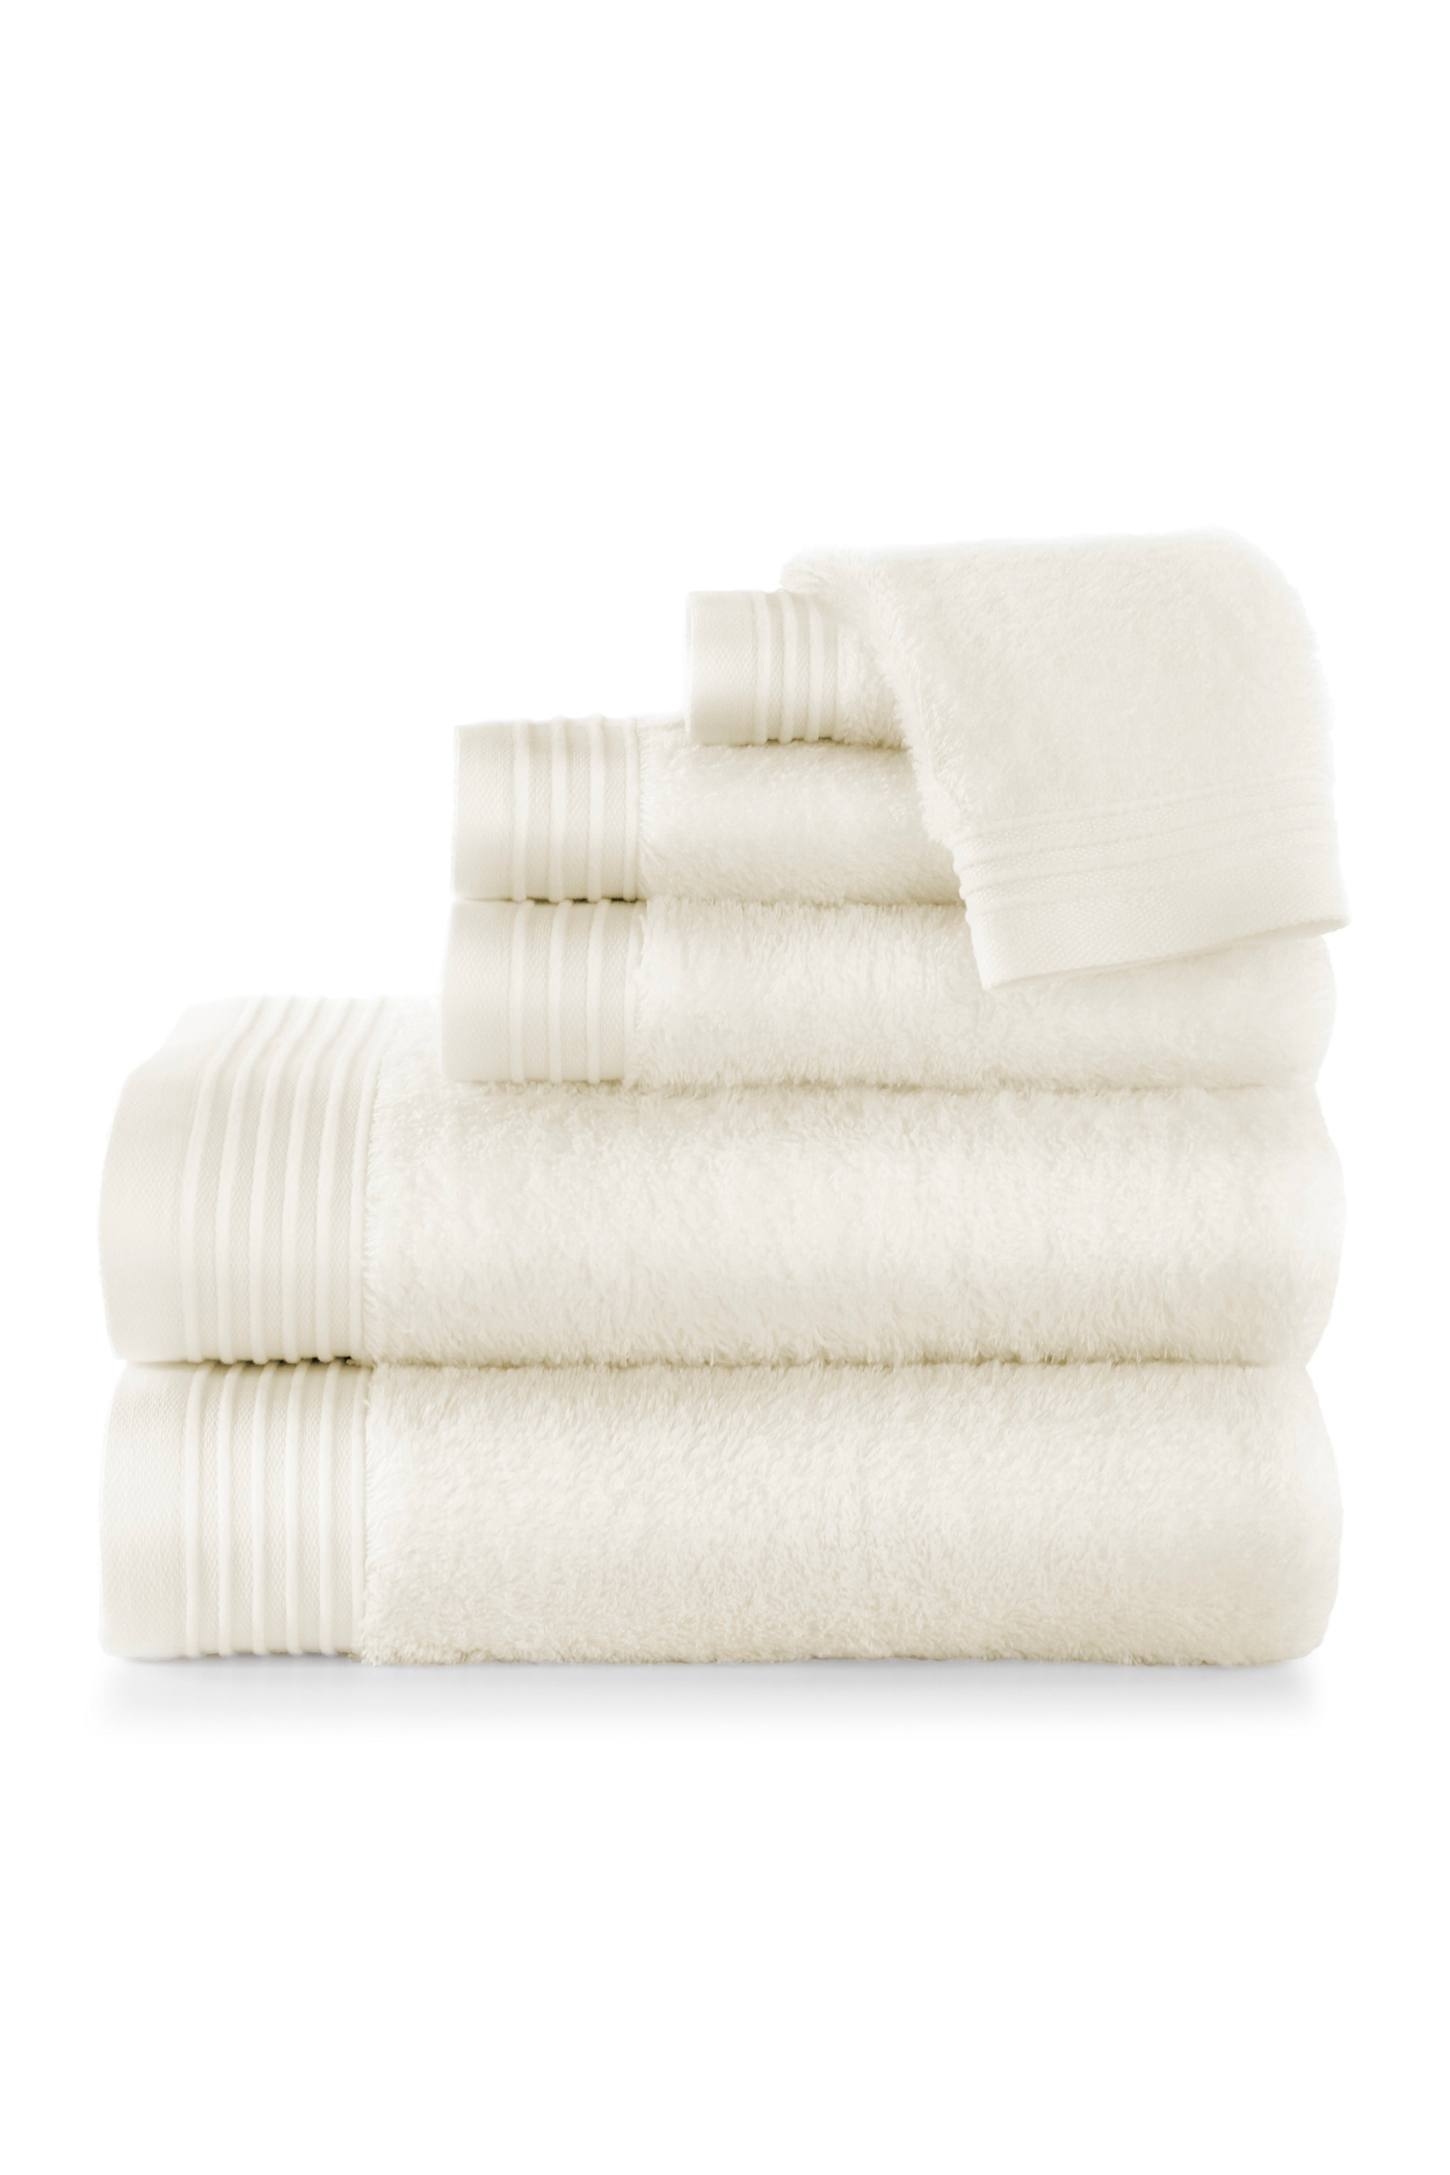 Peacock Alley Bamboo Bath Towel Collection - Ivory - Image 0